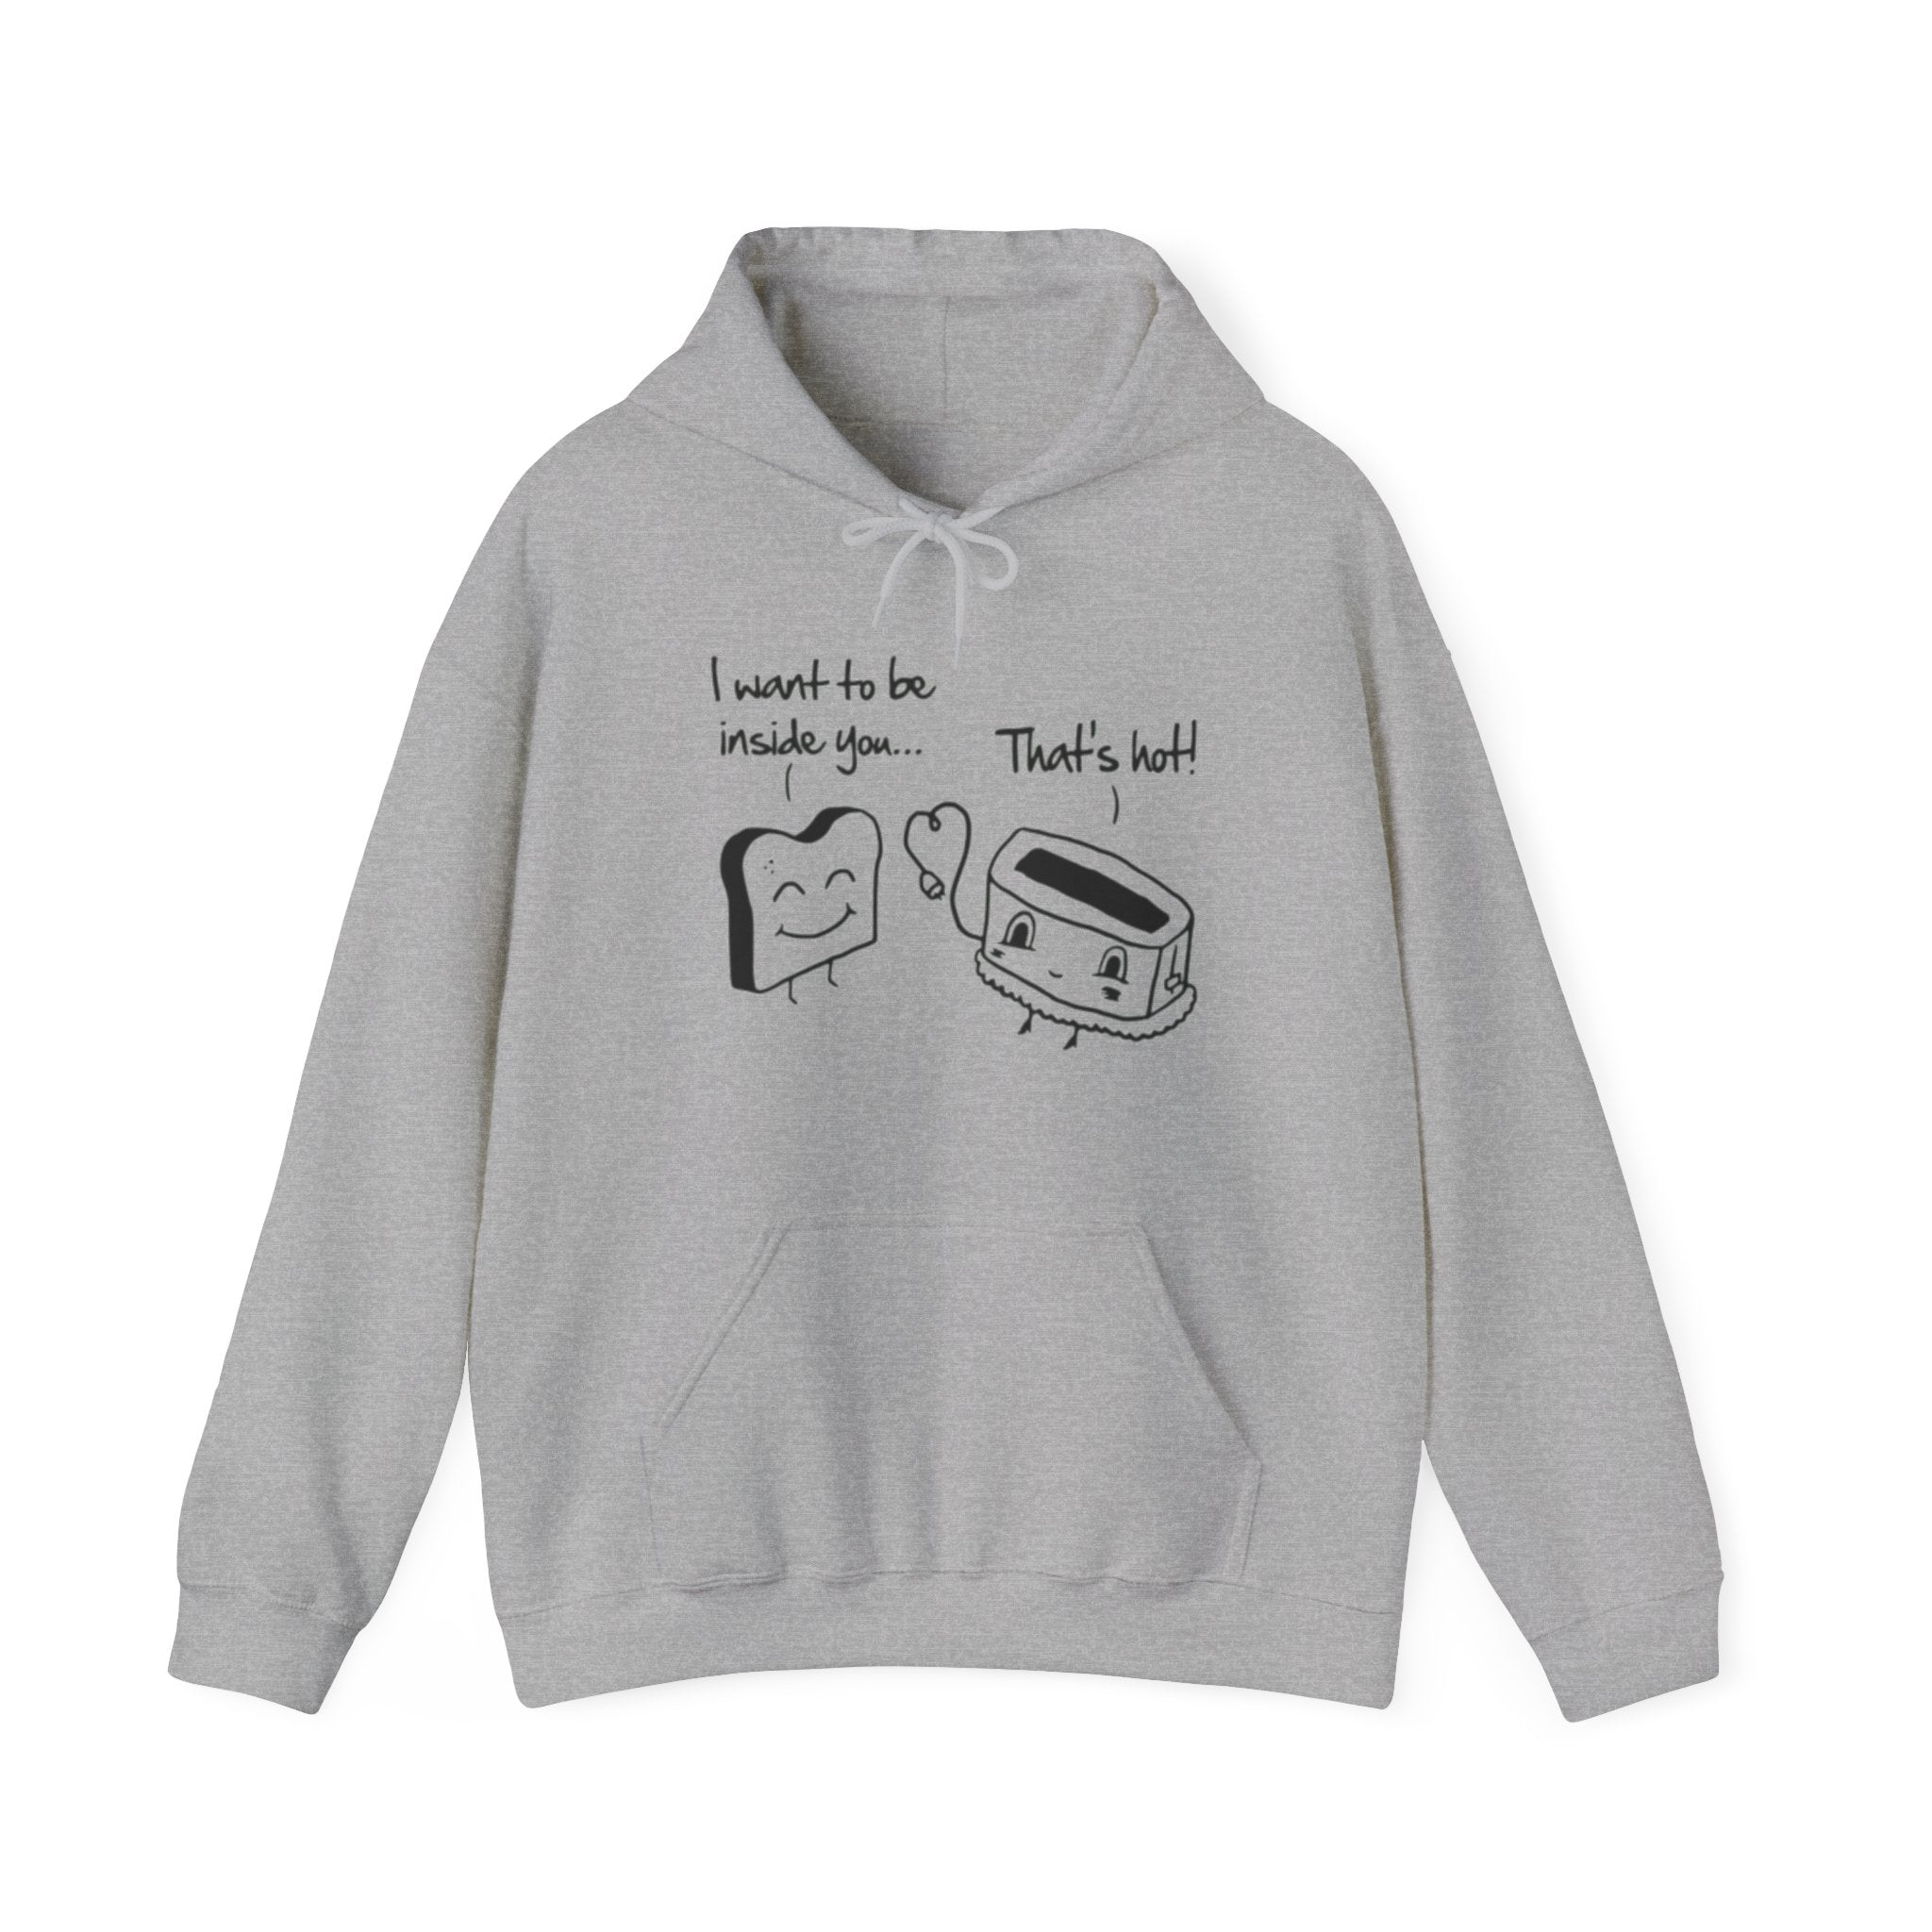 Toaster and Bread Couples Hoodie